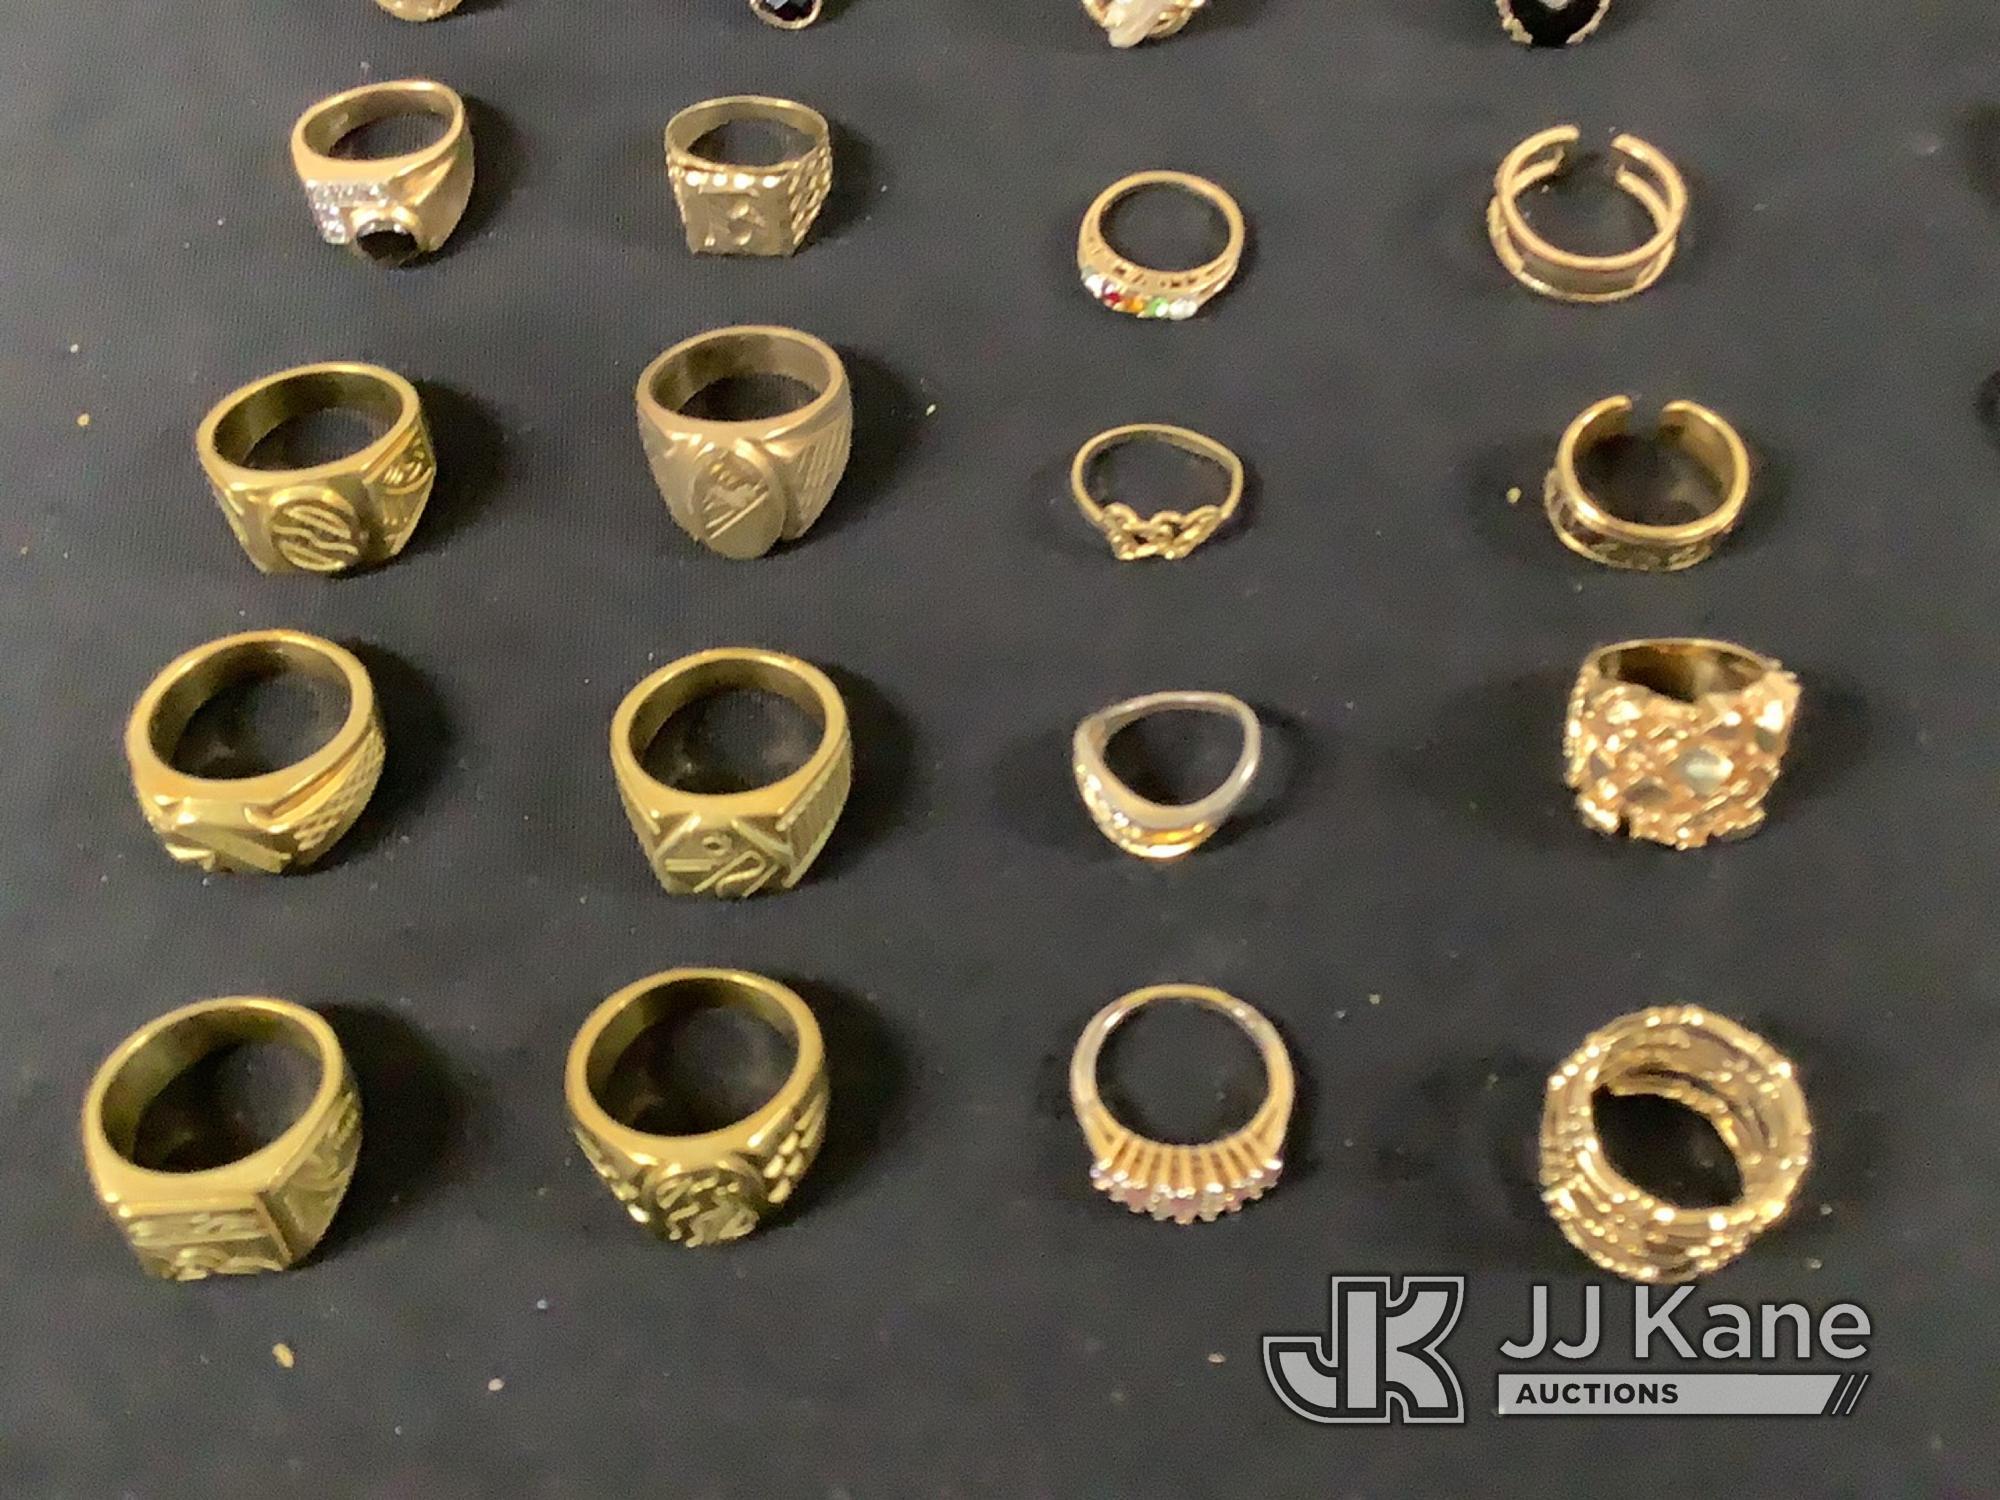 (Jurupa Valley, CA) Rings | possible costume jewelry | authenticity unknown (Used) NOTE: This unit i